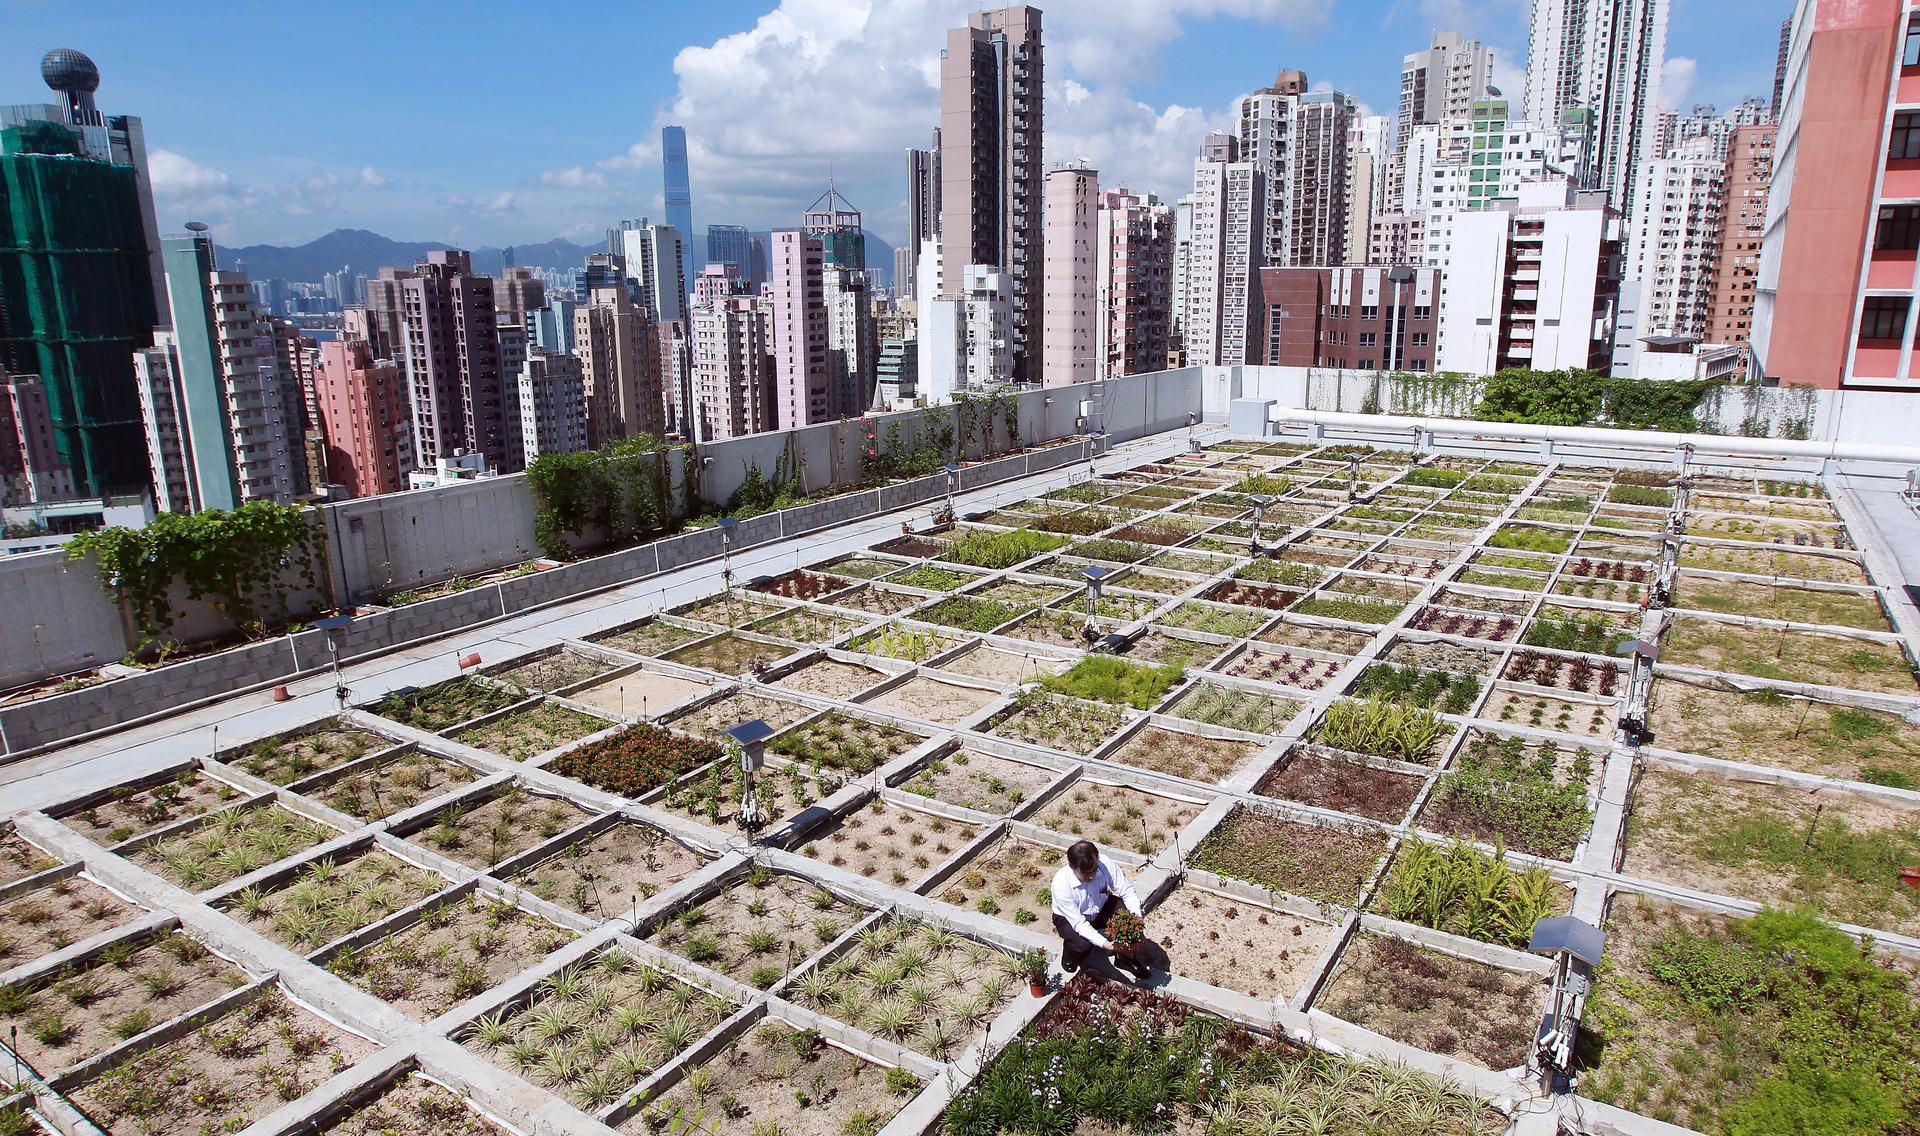 Rooftop garden with a view. Photo: K.Y. Cheng